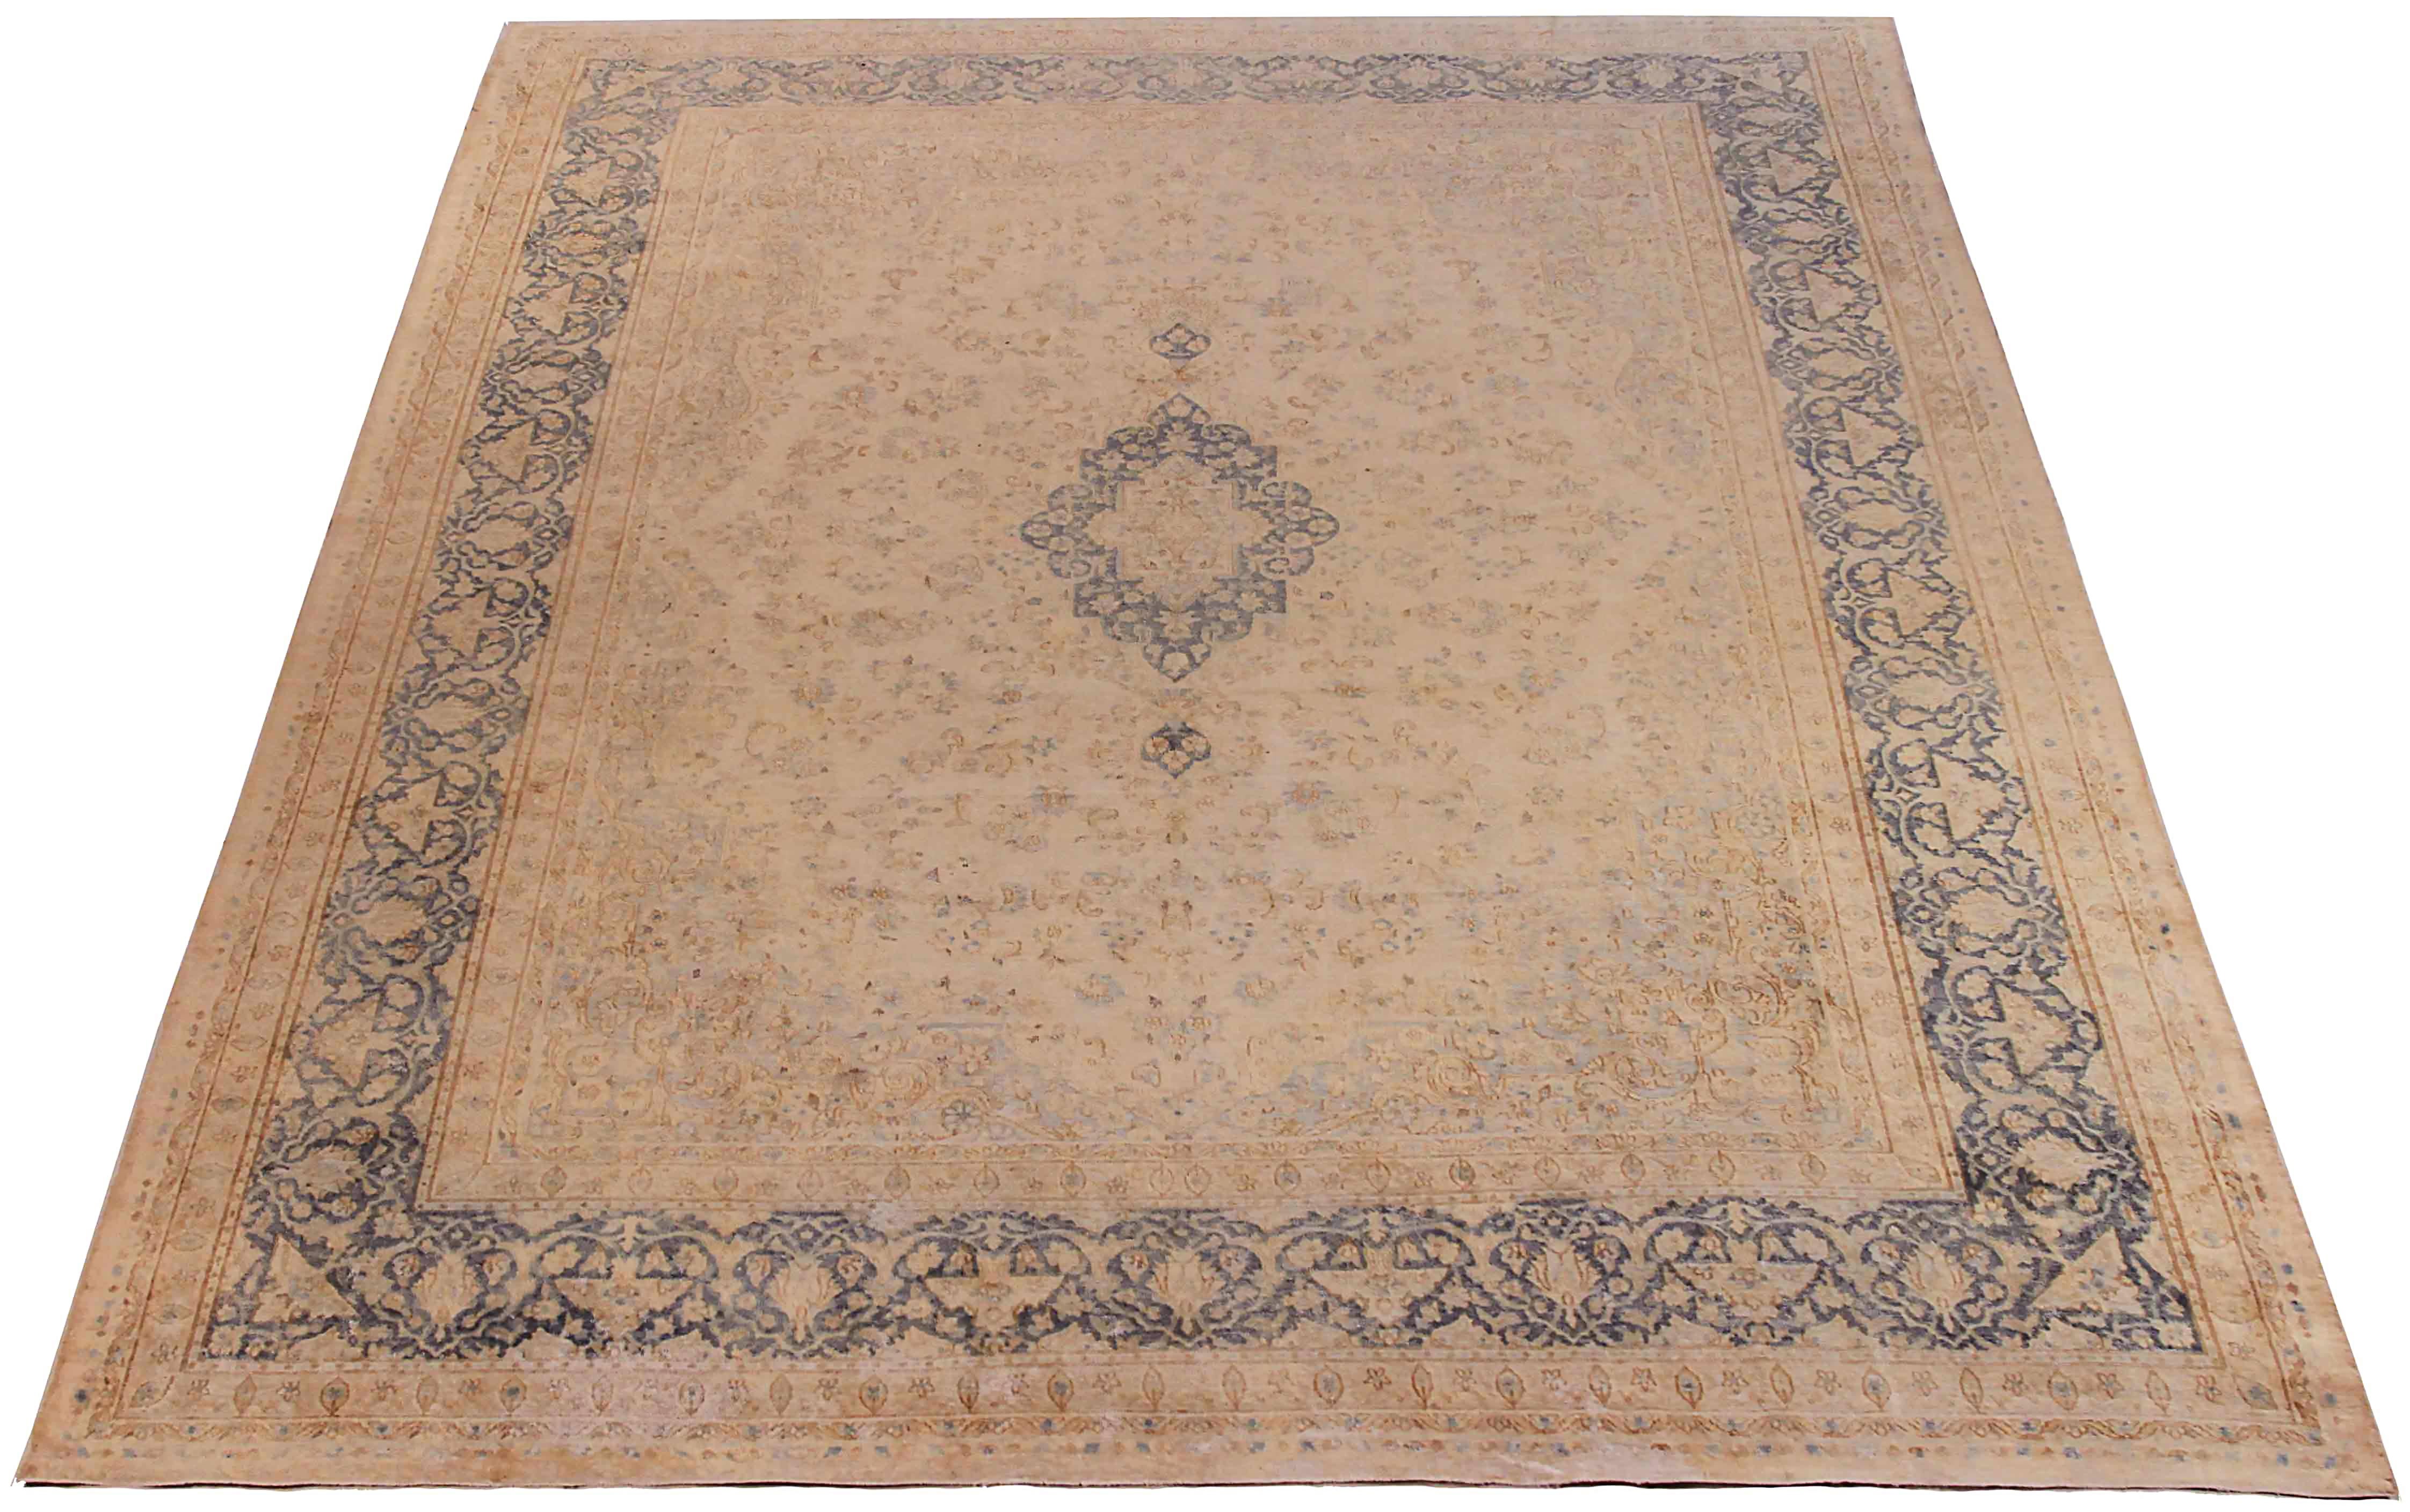 Antique Persian area rug handwoven from the finest sheep’s wool. It’s colored with all-natural vegetable dyes that are safe for humans and pets. It’s a traditional Overdye design handwoven by expert artisans. It’s a lovely area rug that can be